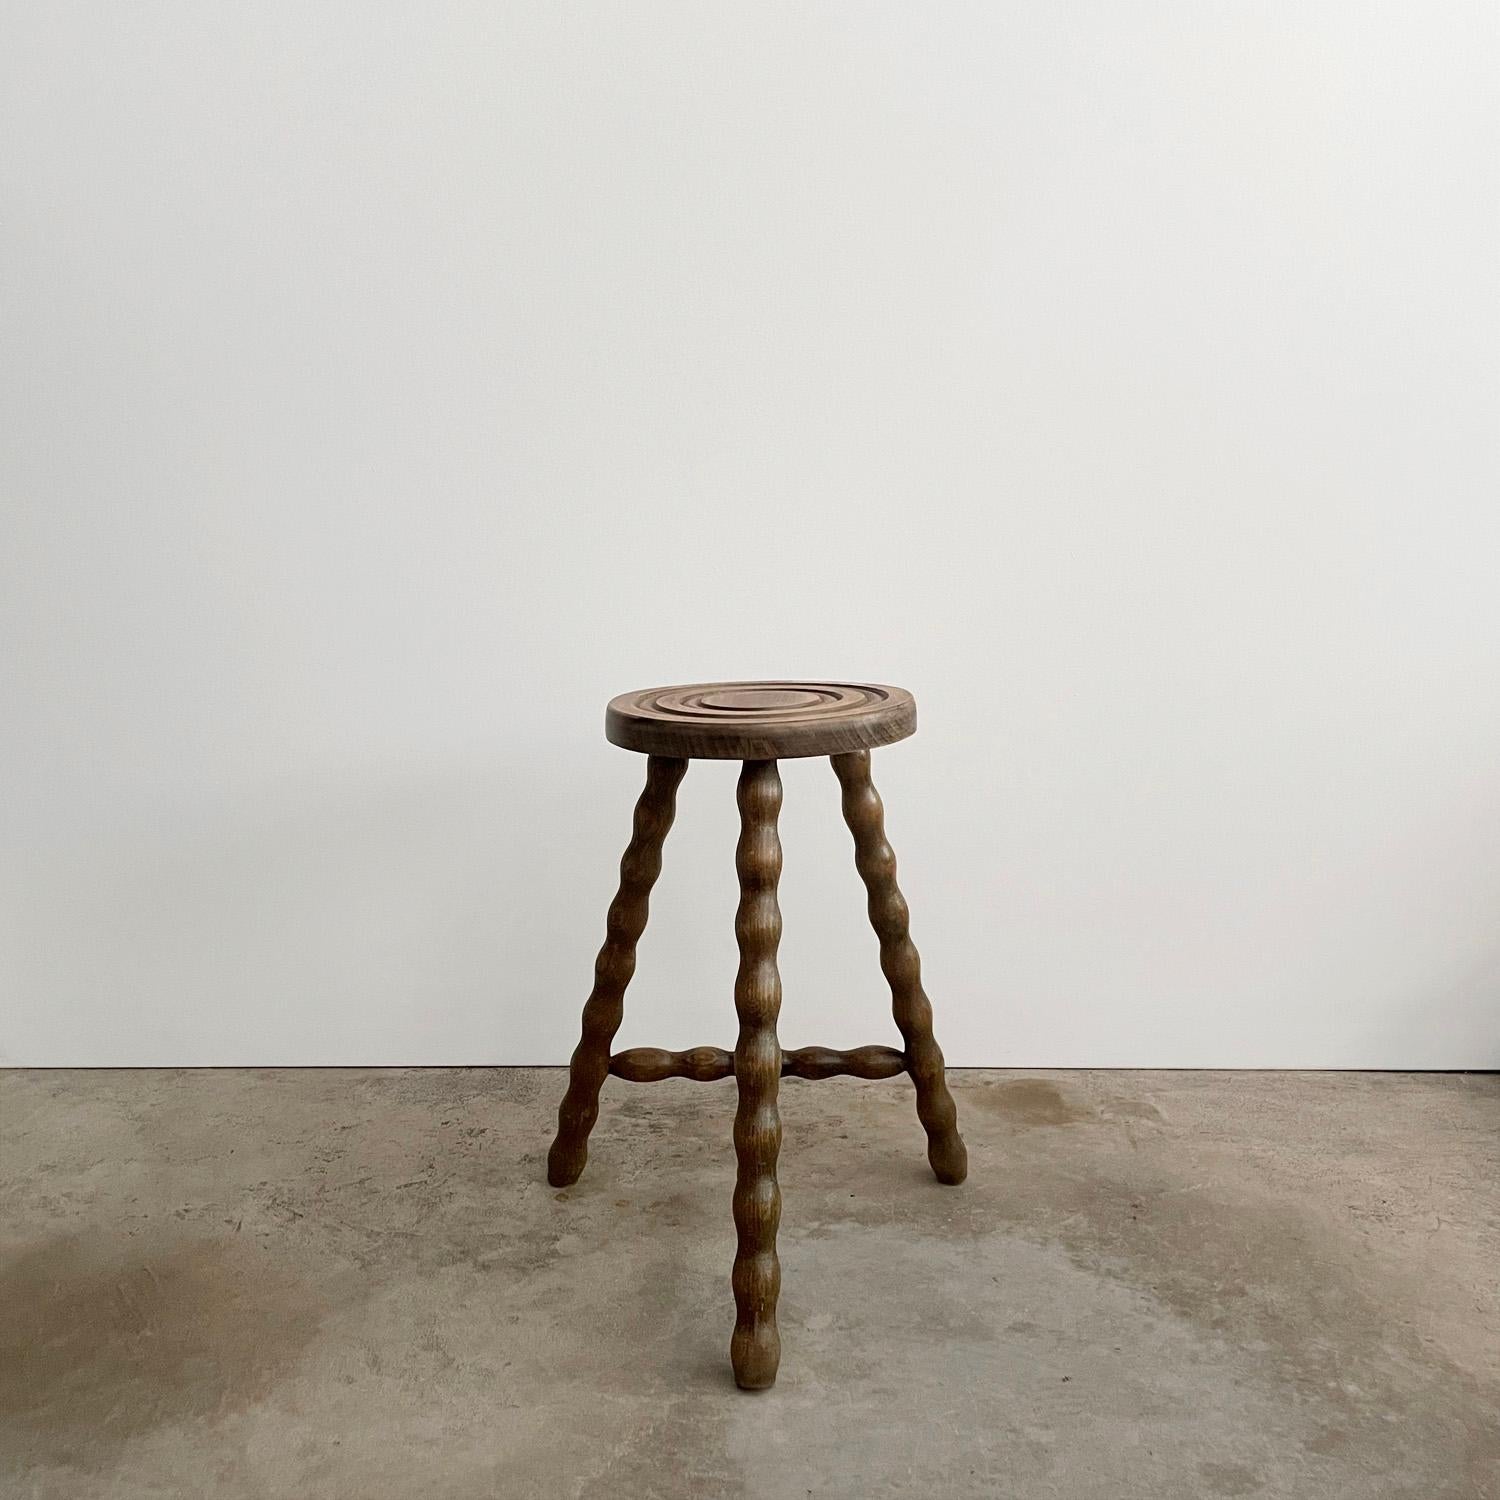 Rustic French wood tripod stool
France, mid-century
Can be used as a stool or side table
Circular seat with whimsical turned wood tripod legs
Original wood finish with lovely grain detail
Patina from age and use